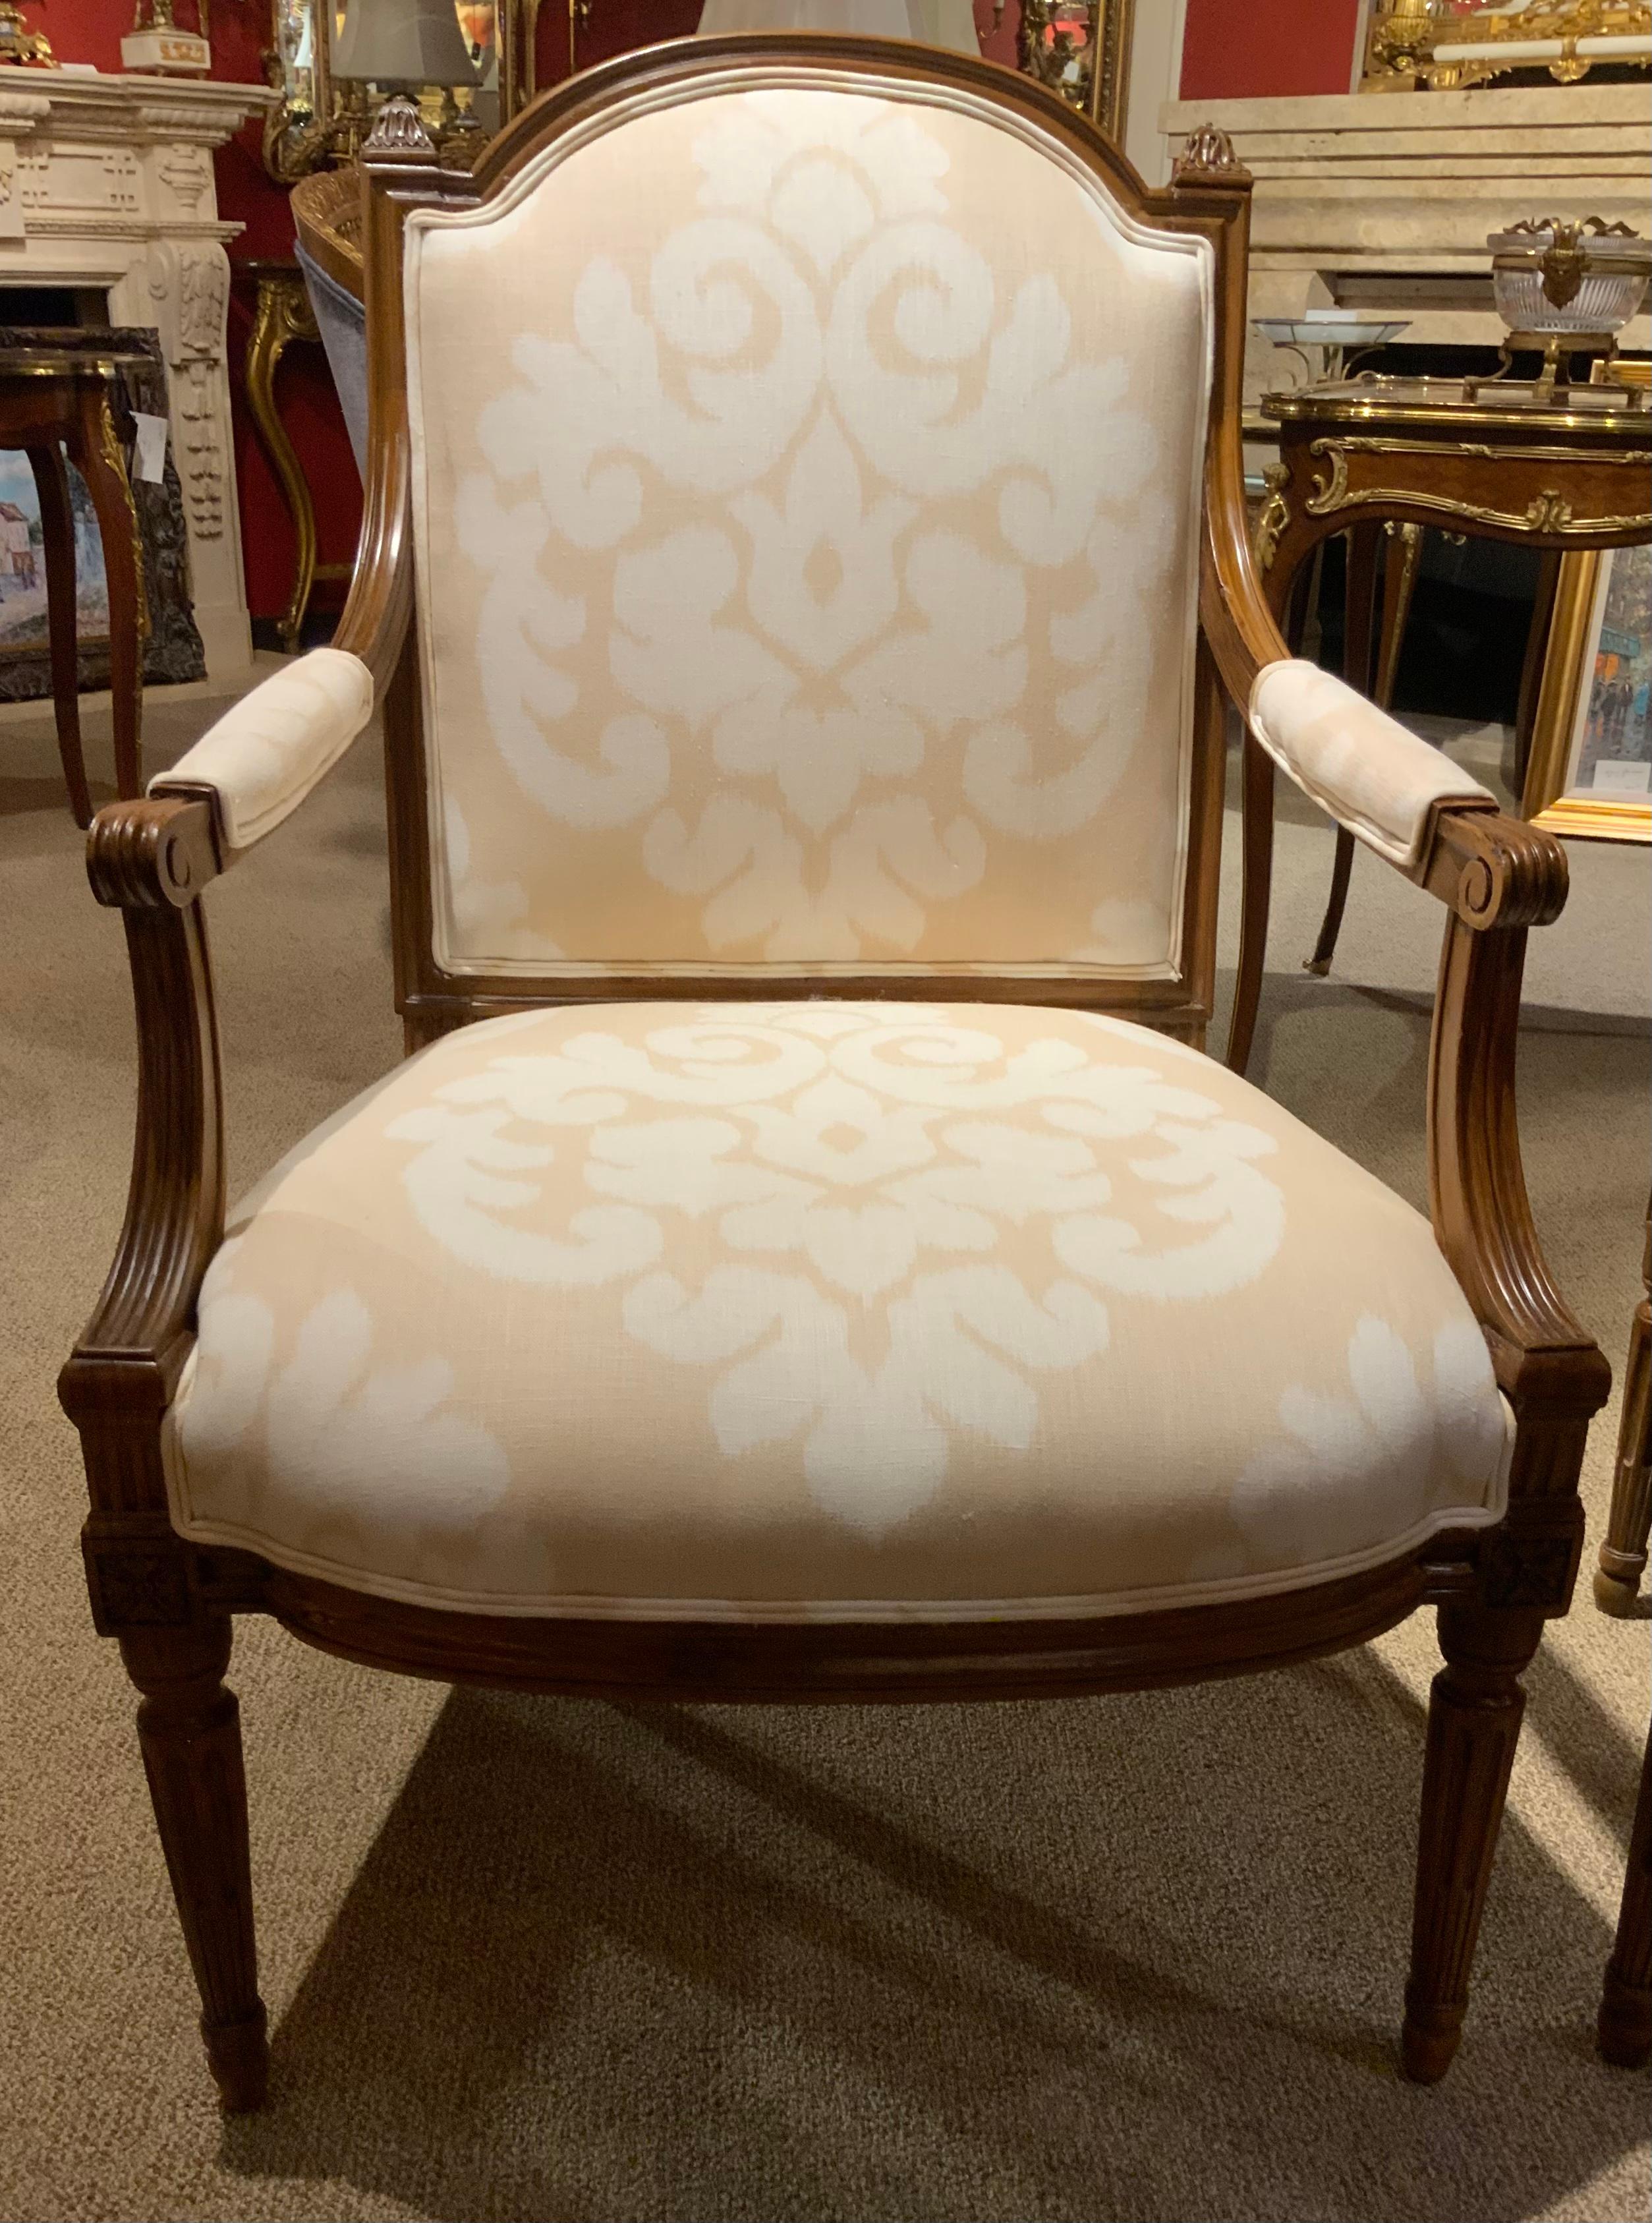 Pair of Walnut Louis XVI—Style Arm Chairs 19th Century with Domed Back In Excellent Condition For Sale In Houston, TX